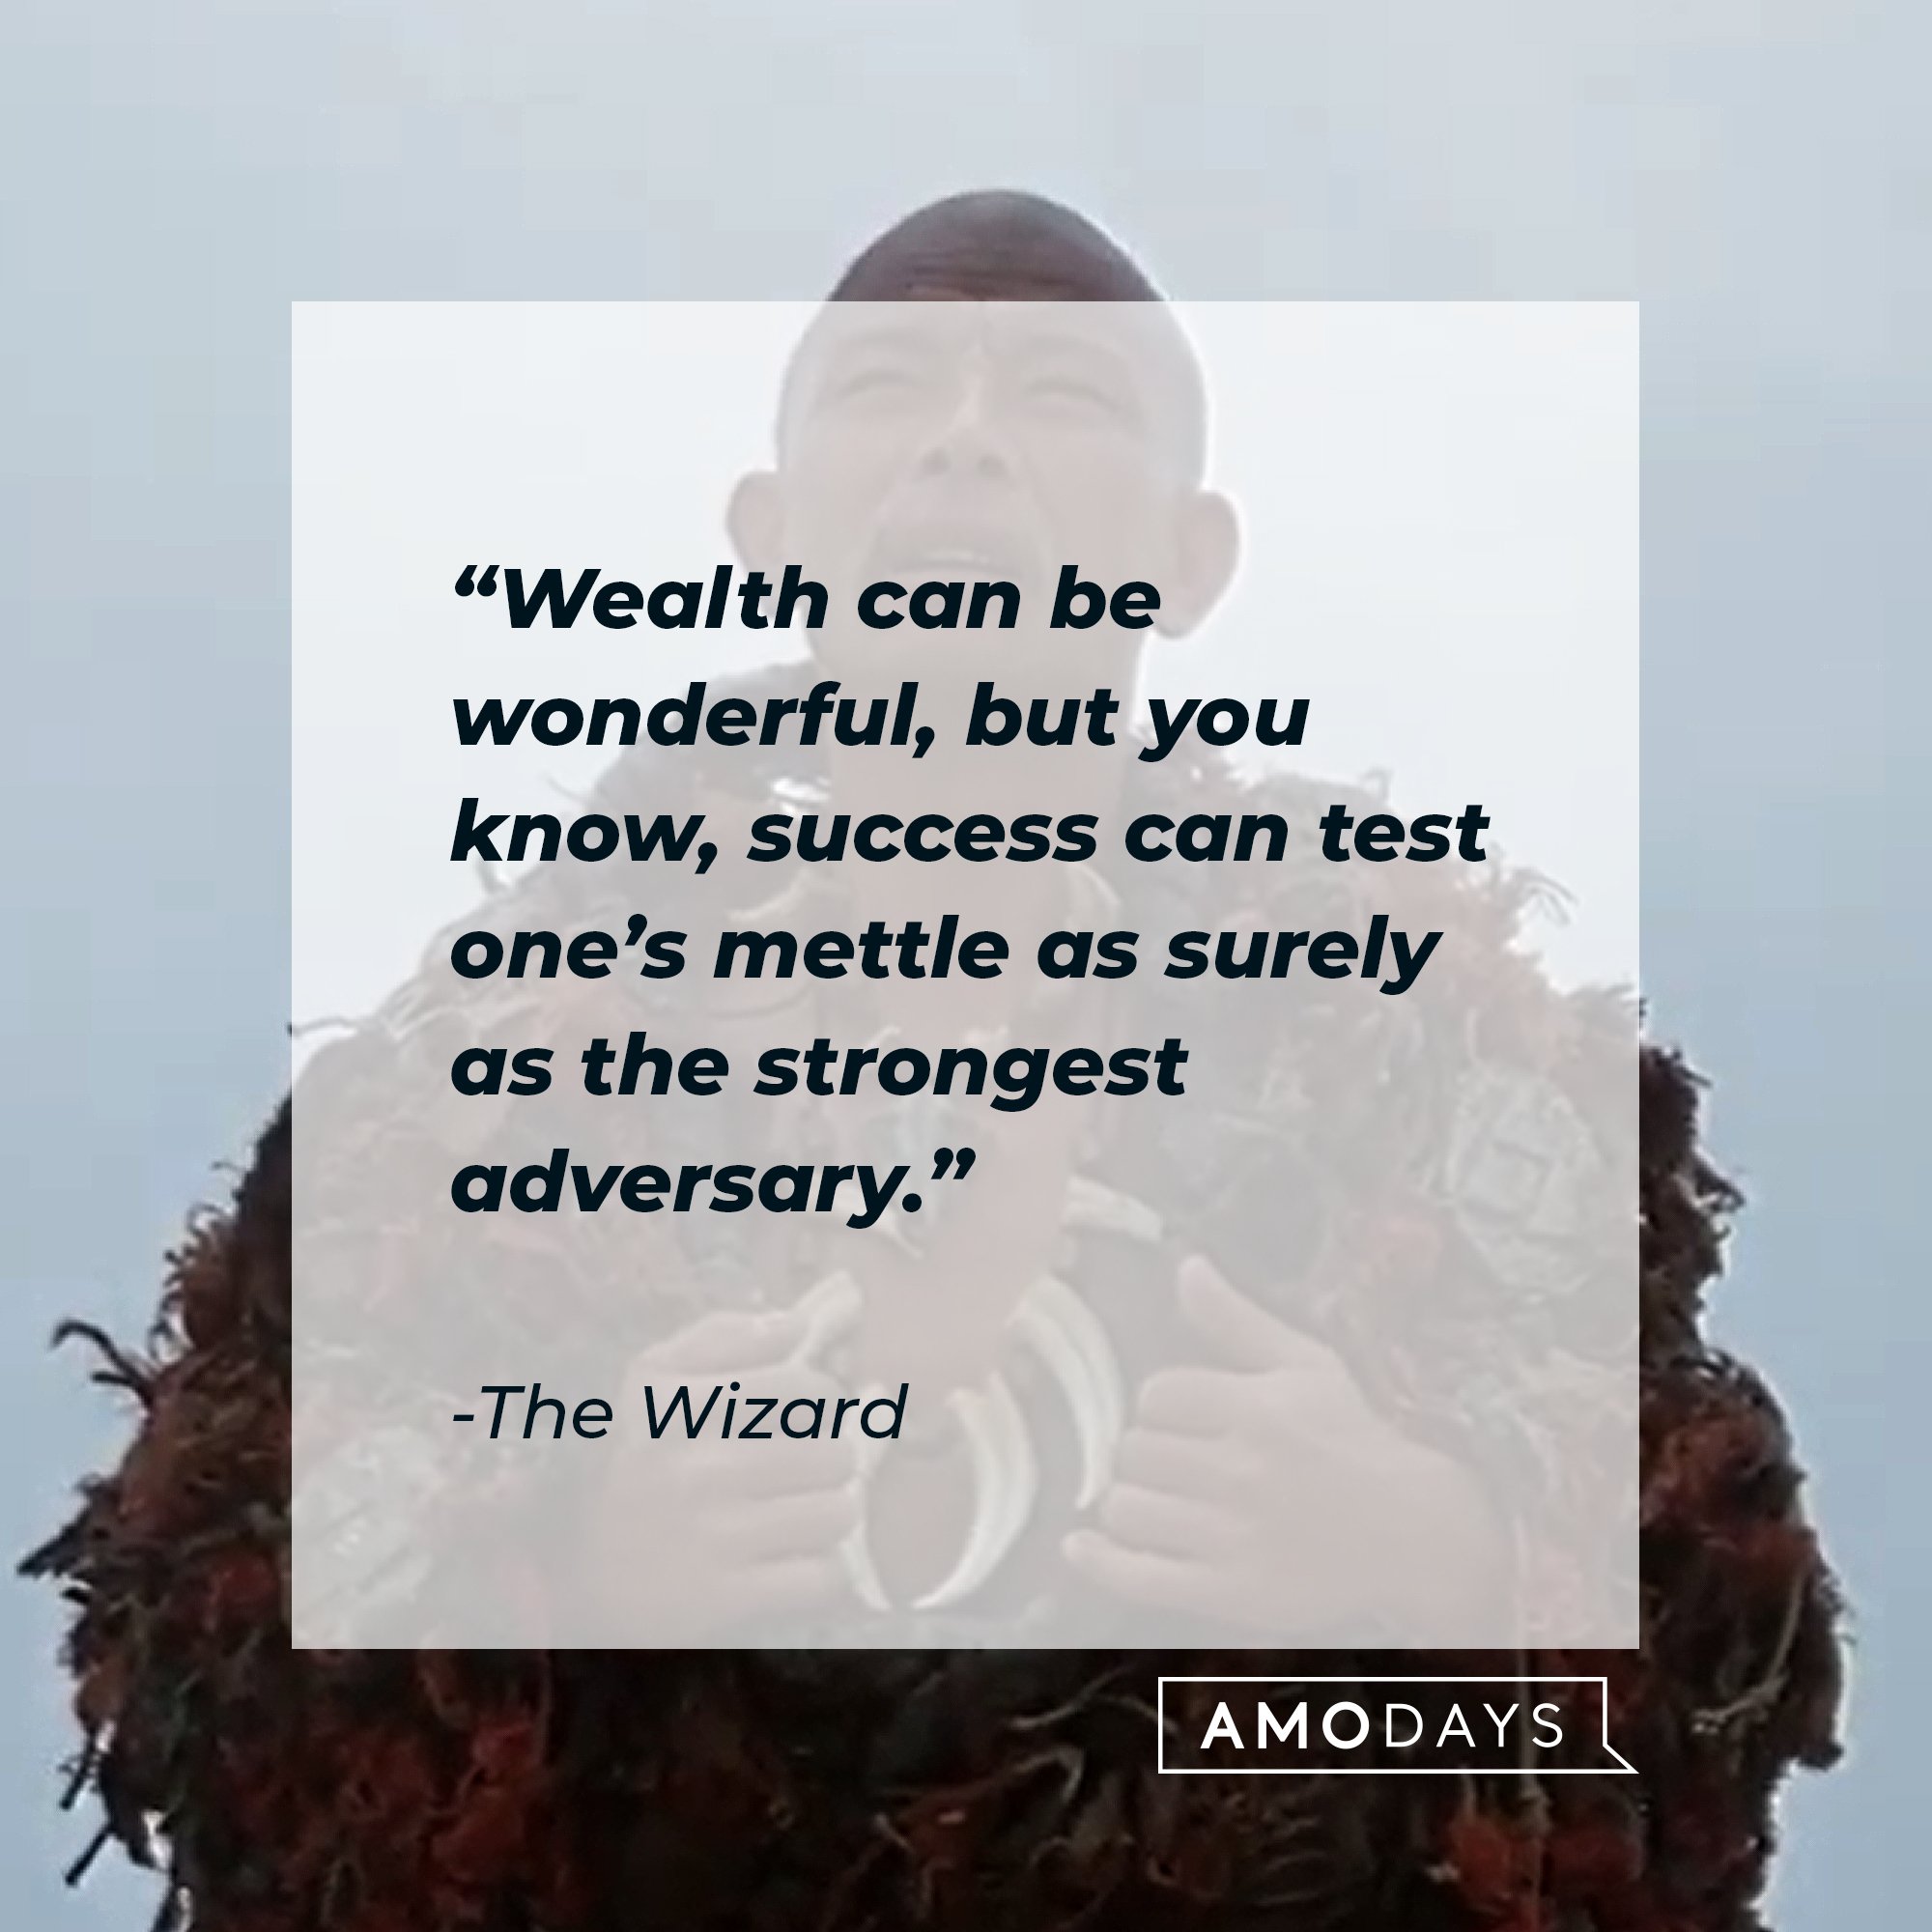 The Wizard's quote: “Wealth can be wonderful, but you know, success can test one’s mettle as surely as the strongest adversary.” | Image: AmoDays